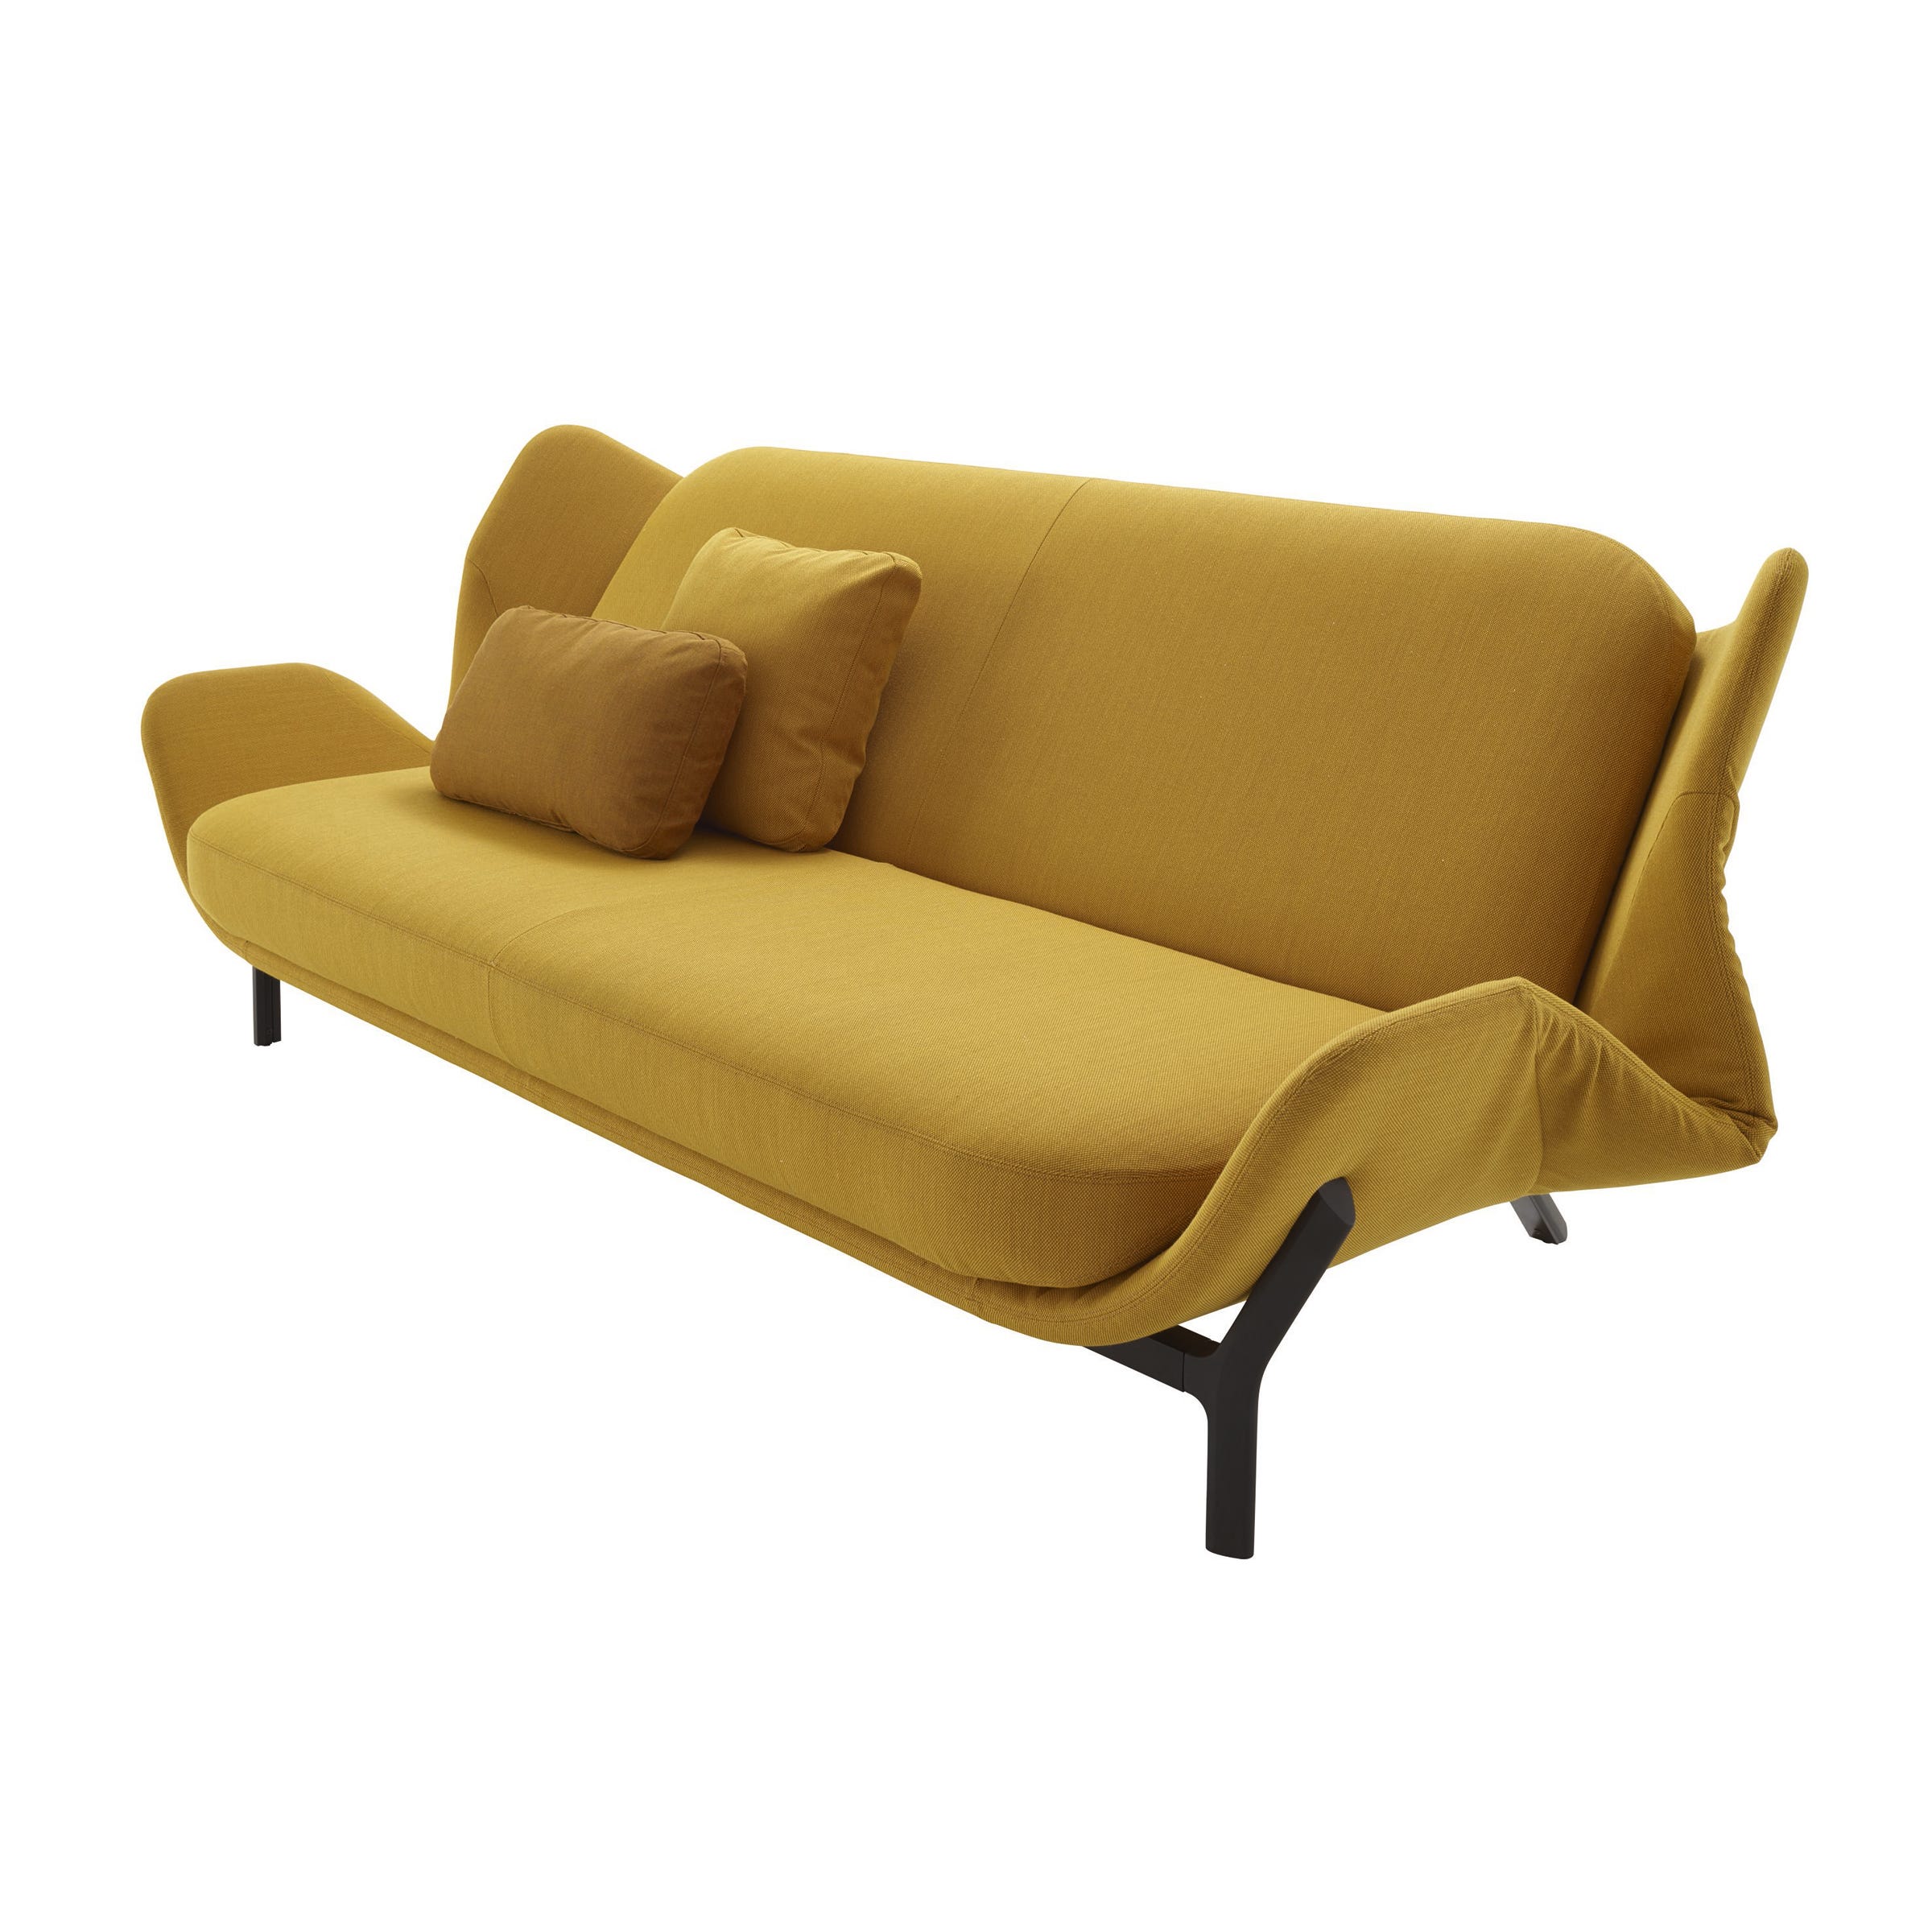 Clam, a modern sofa in mustard by Leo Dubreil and Baptiste Pilato for Ligne Roset shows off curves and does double duty as a chic sleeper. The bed-settee is easy to operate and designed to be viewed on all sides. The sleep area is generous, and those side curves create a stylish shape at both ends when open. Placed in the middle of a room, the piece is like an island for reading and resting.